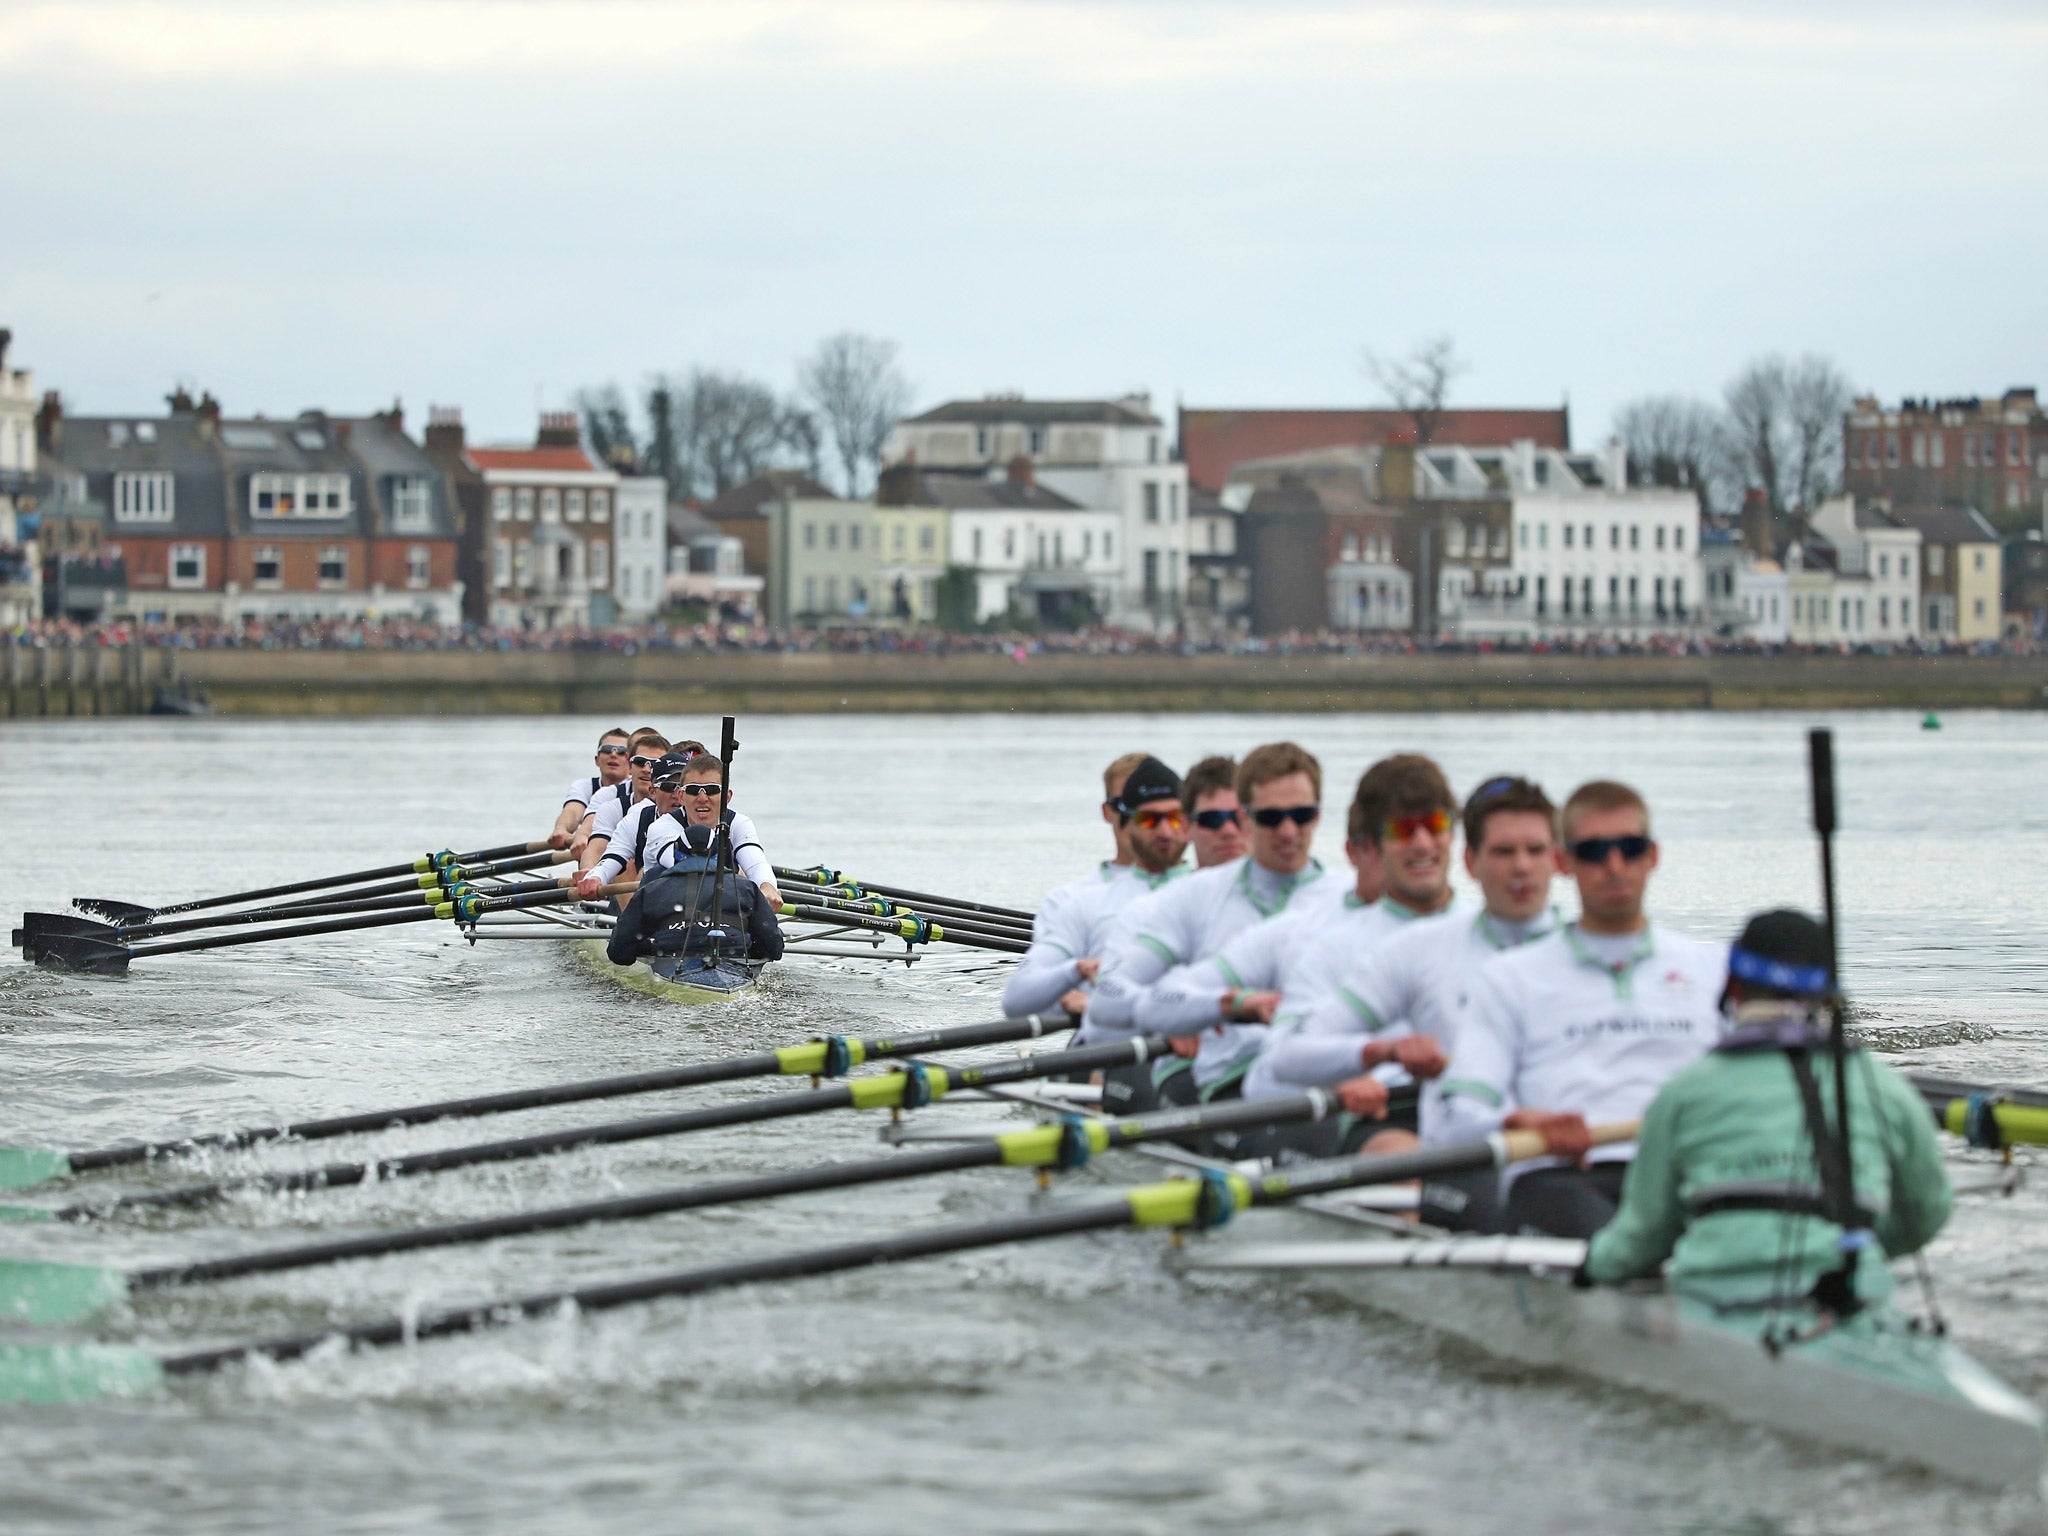 The Boat Race between Cambridge and Oxford universities is one of the most prestigious events on the sporting calendar